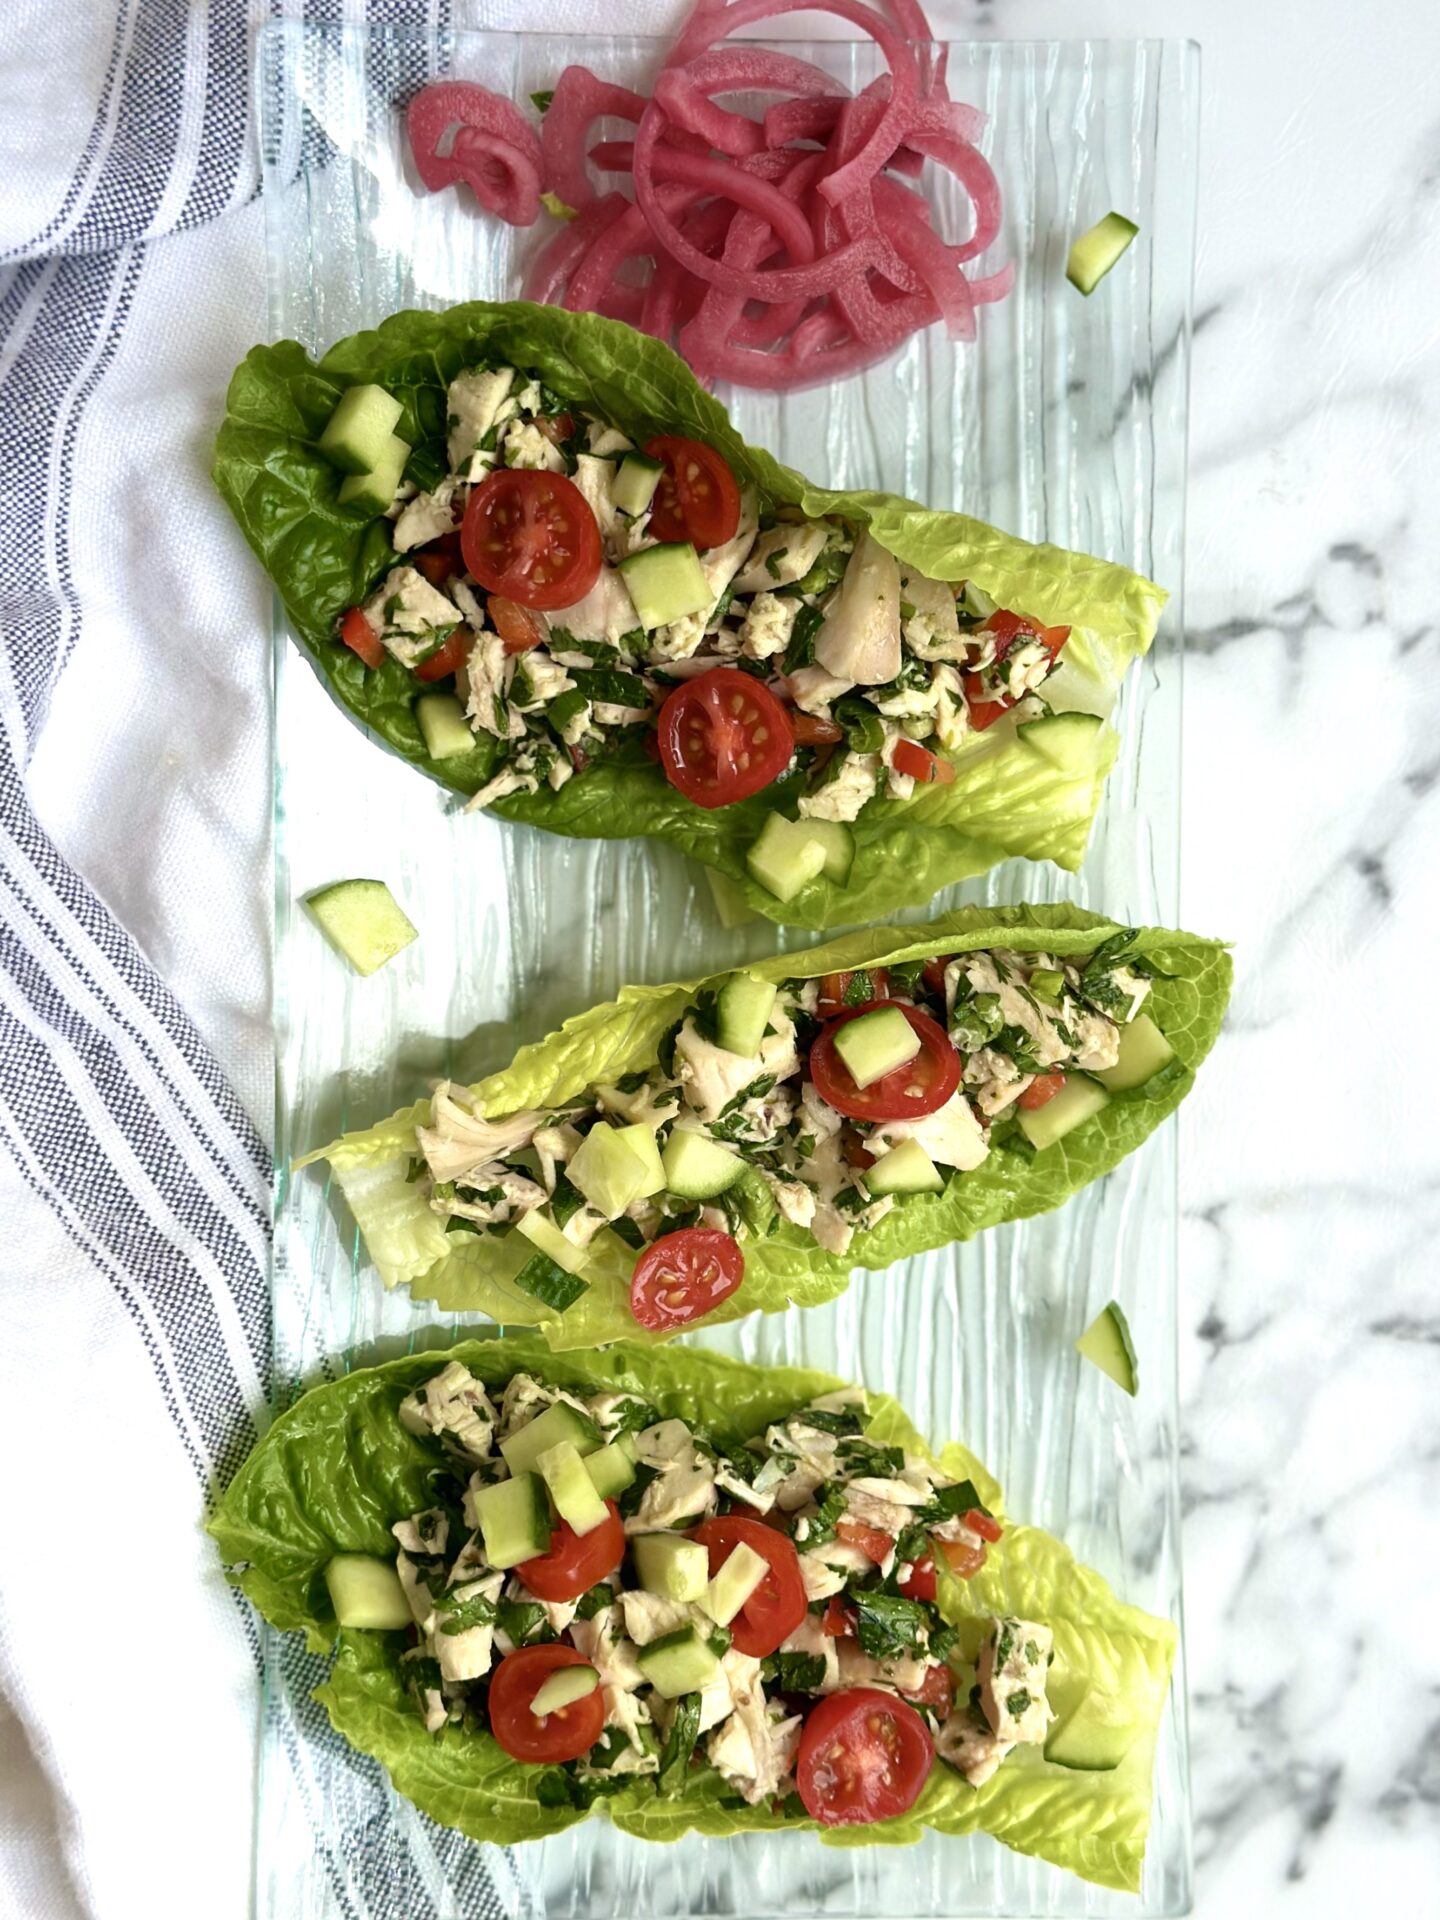 A trio of romaine lettuce leaves are stuffed with chimichurri chicken salad and served on a glass plate